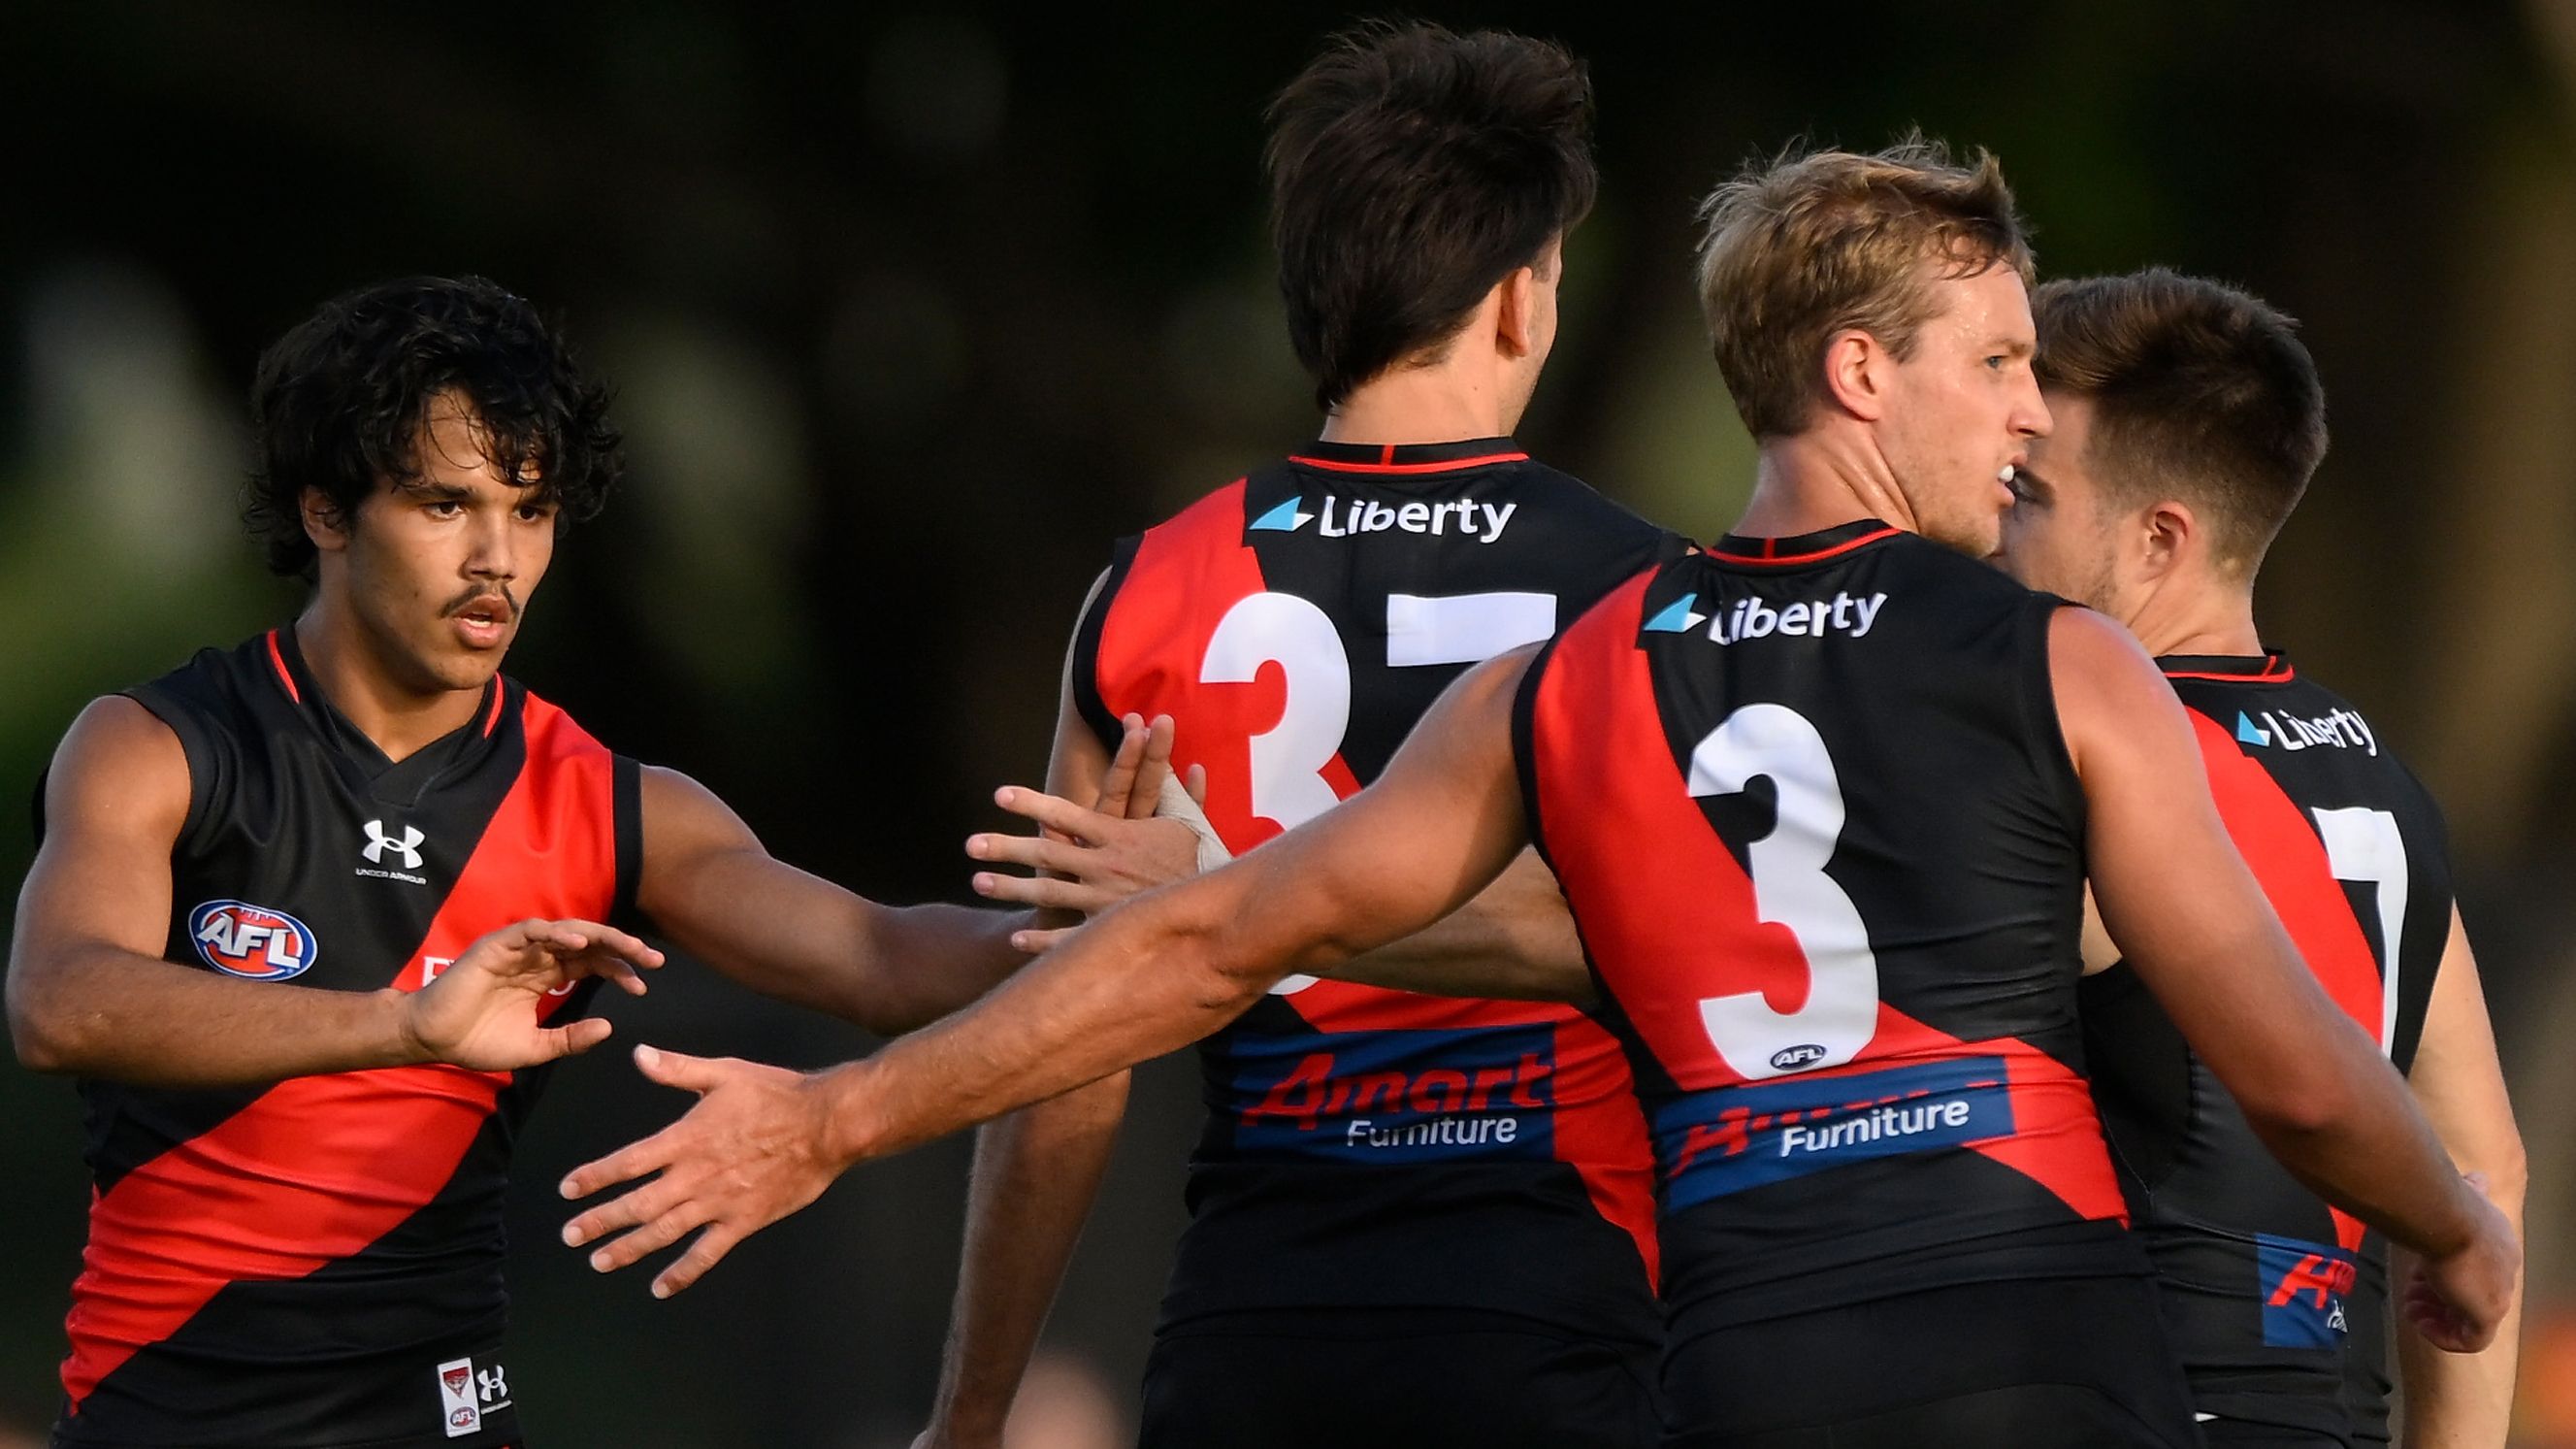 GOLD COAST, AUSTRALIA - FEBRUARY 23: Alwyn Davey of the Saints celebrates kicking a goal with team mates during the AFL match simulation between Gold Coast Suns and Essendon Bombers at Austworld Centre Oval on February 23, 2023 in Gold Coast, Australia. (Photo by Matt Roberts/Getty Images)